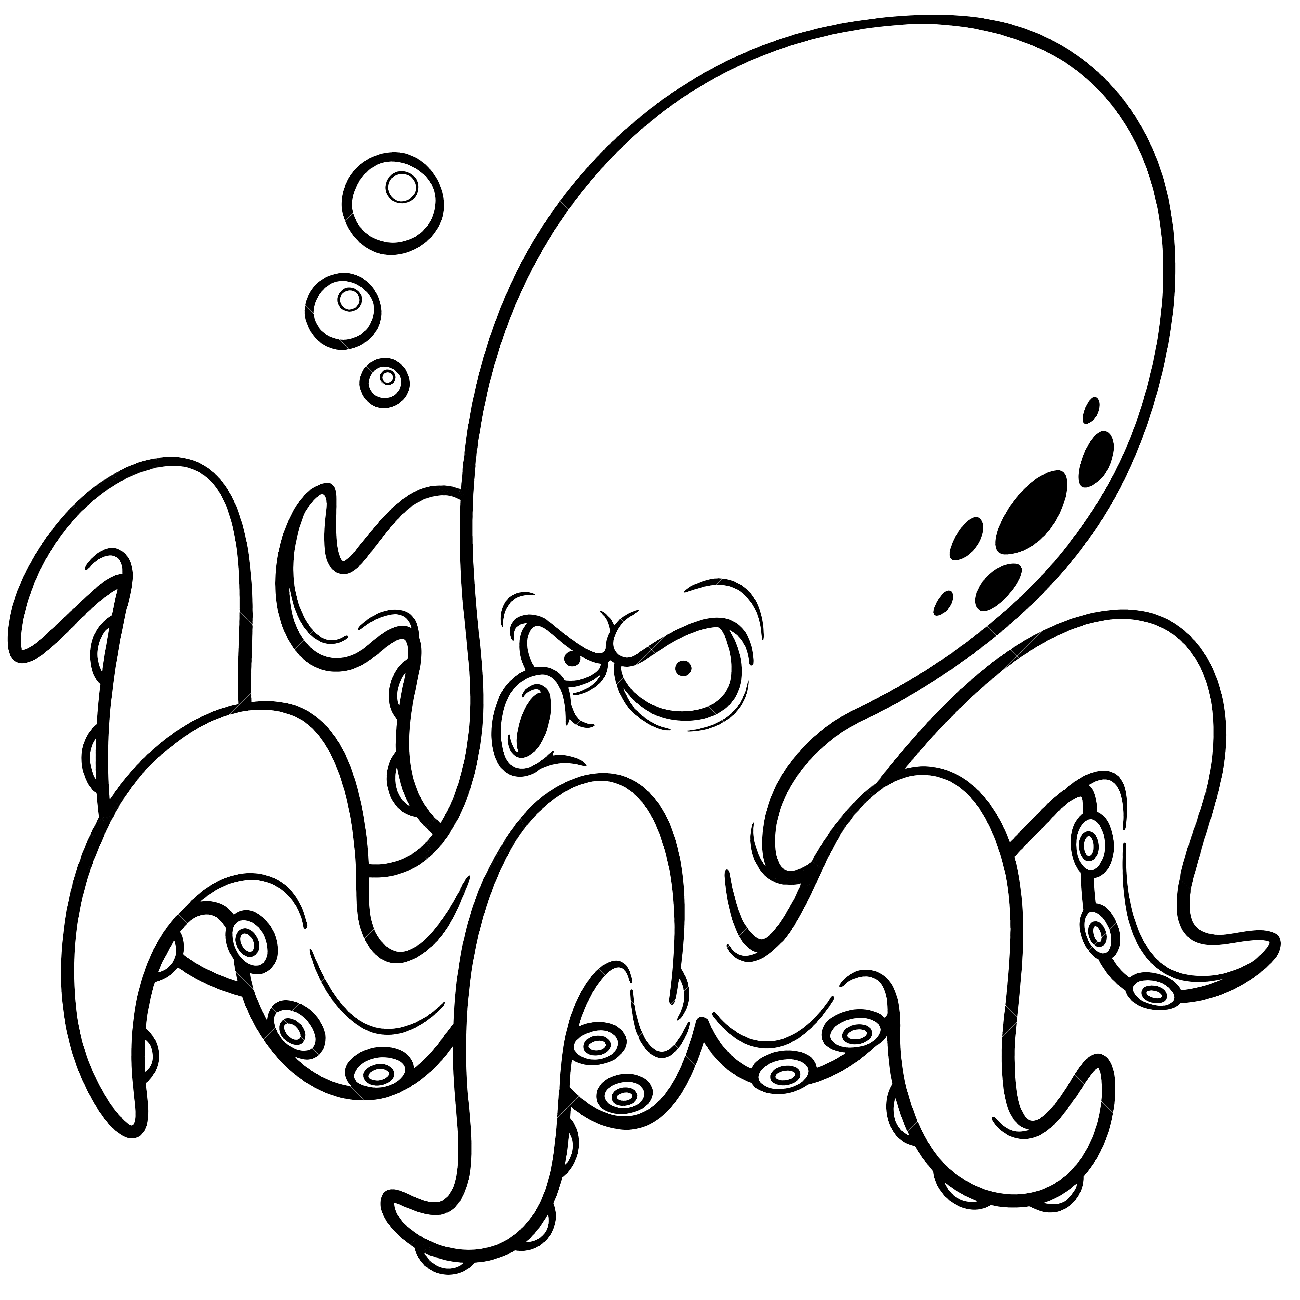 Funny Octopus Coloring Page